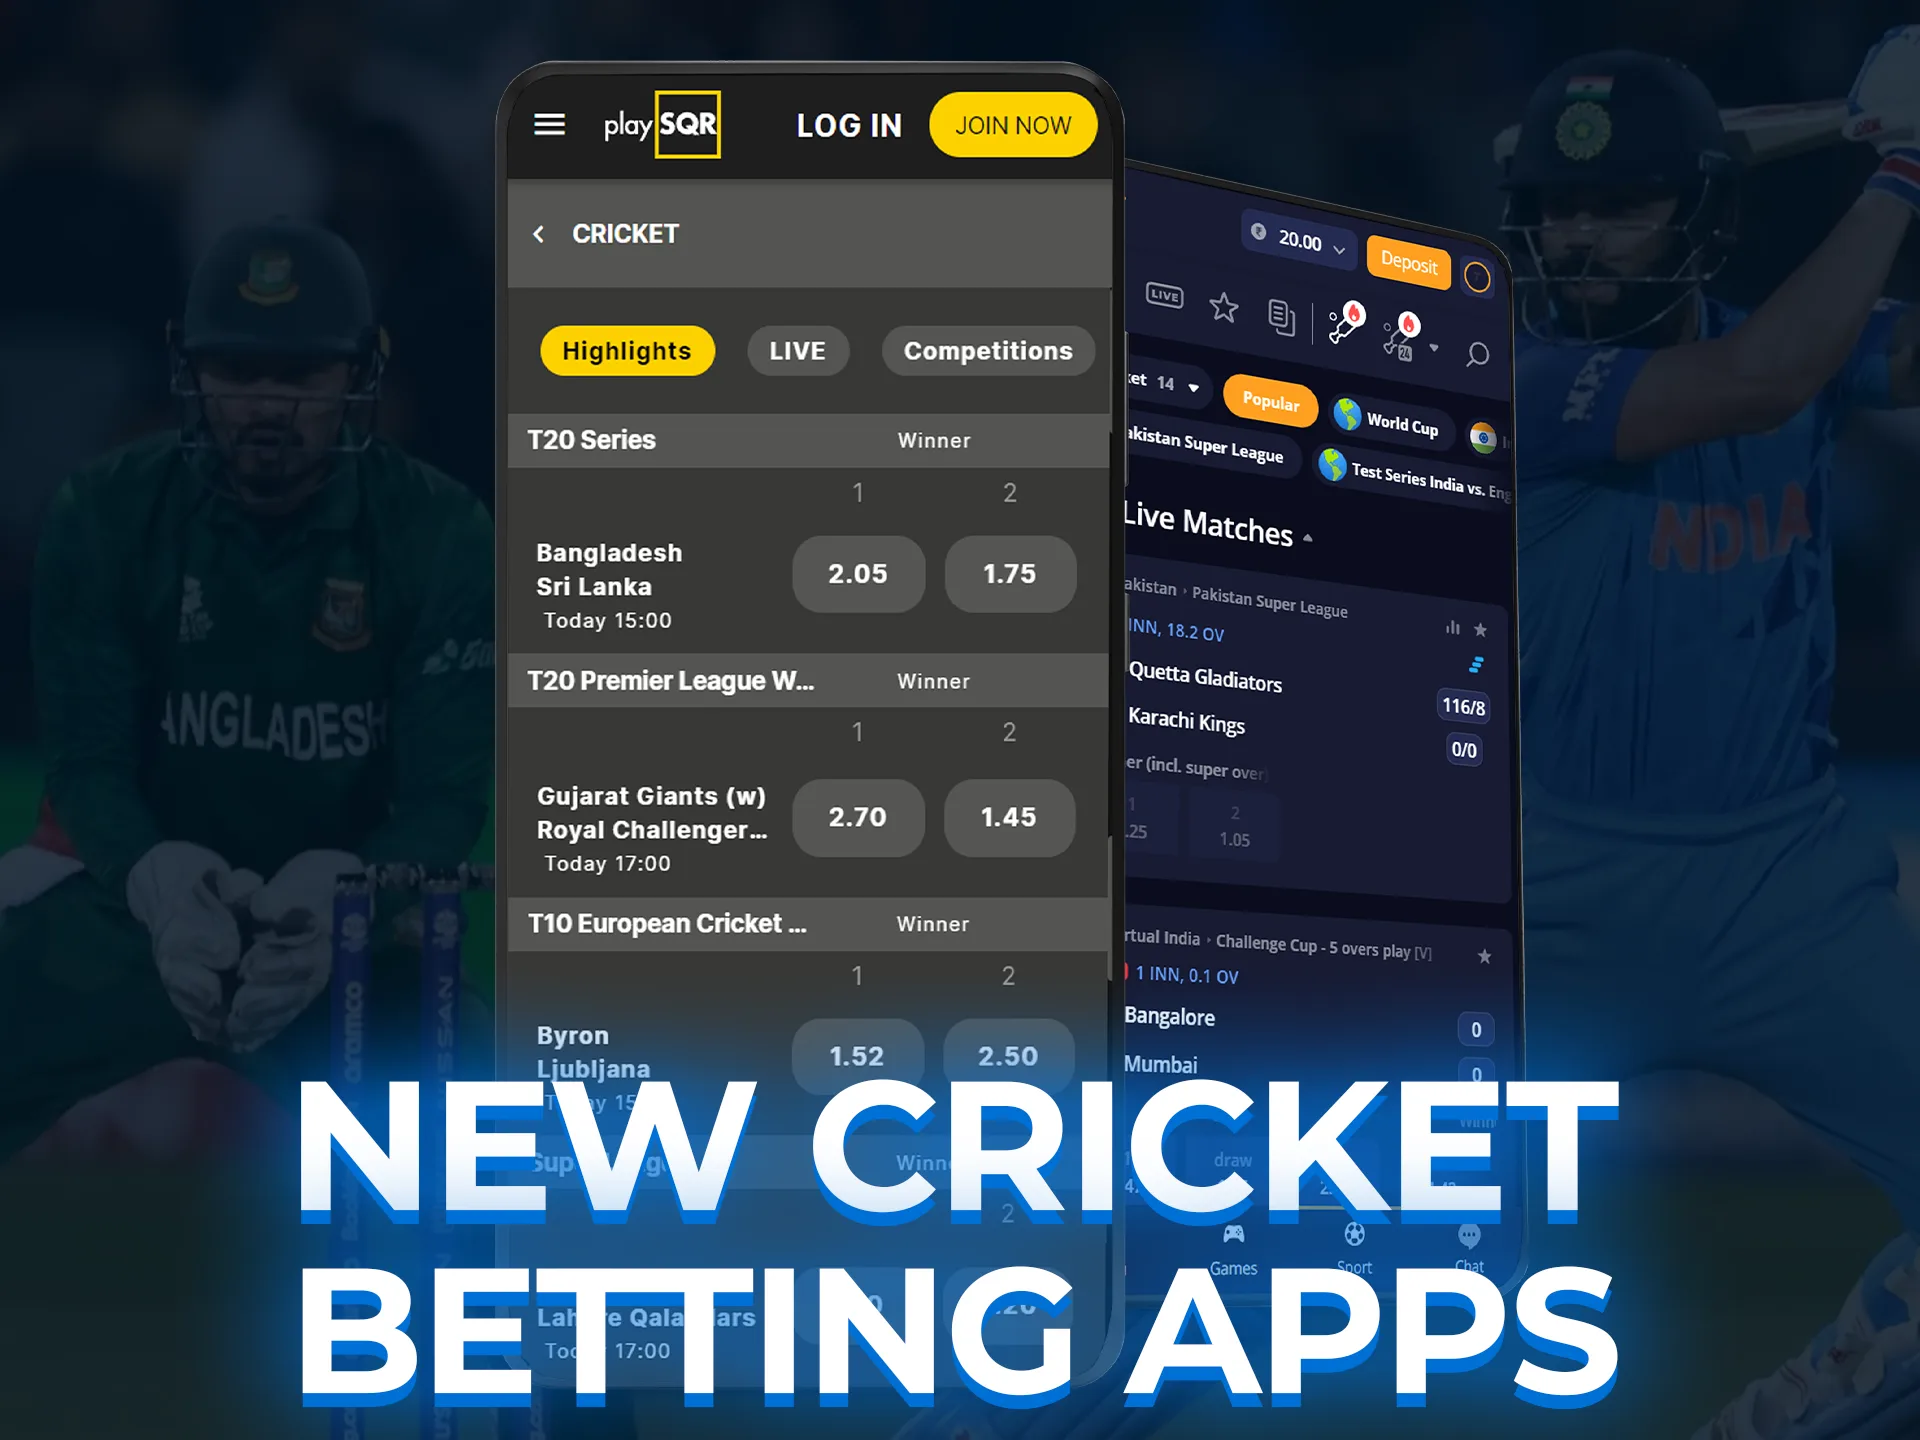 Every month new cricket betting apps are introduced in the Indian market.